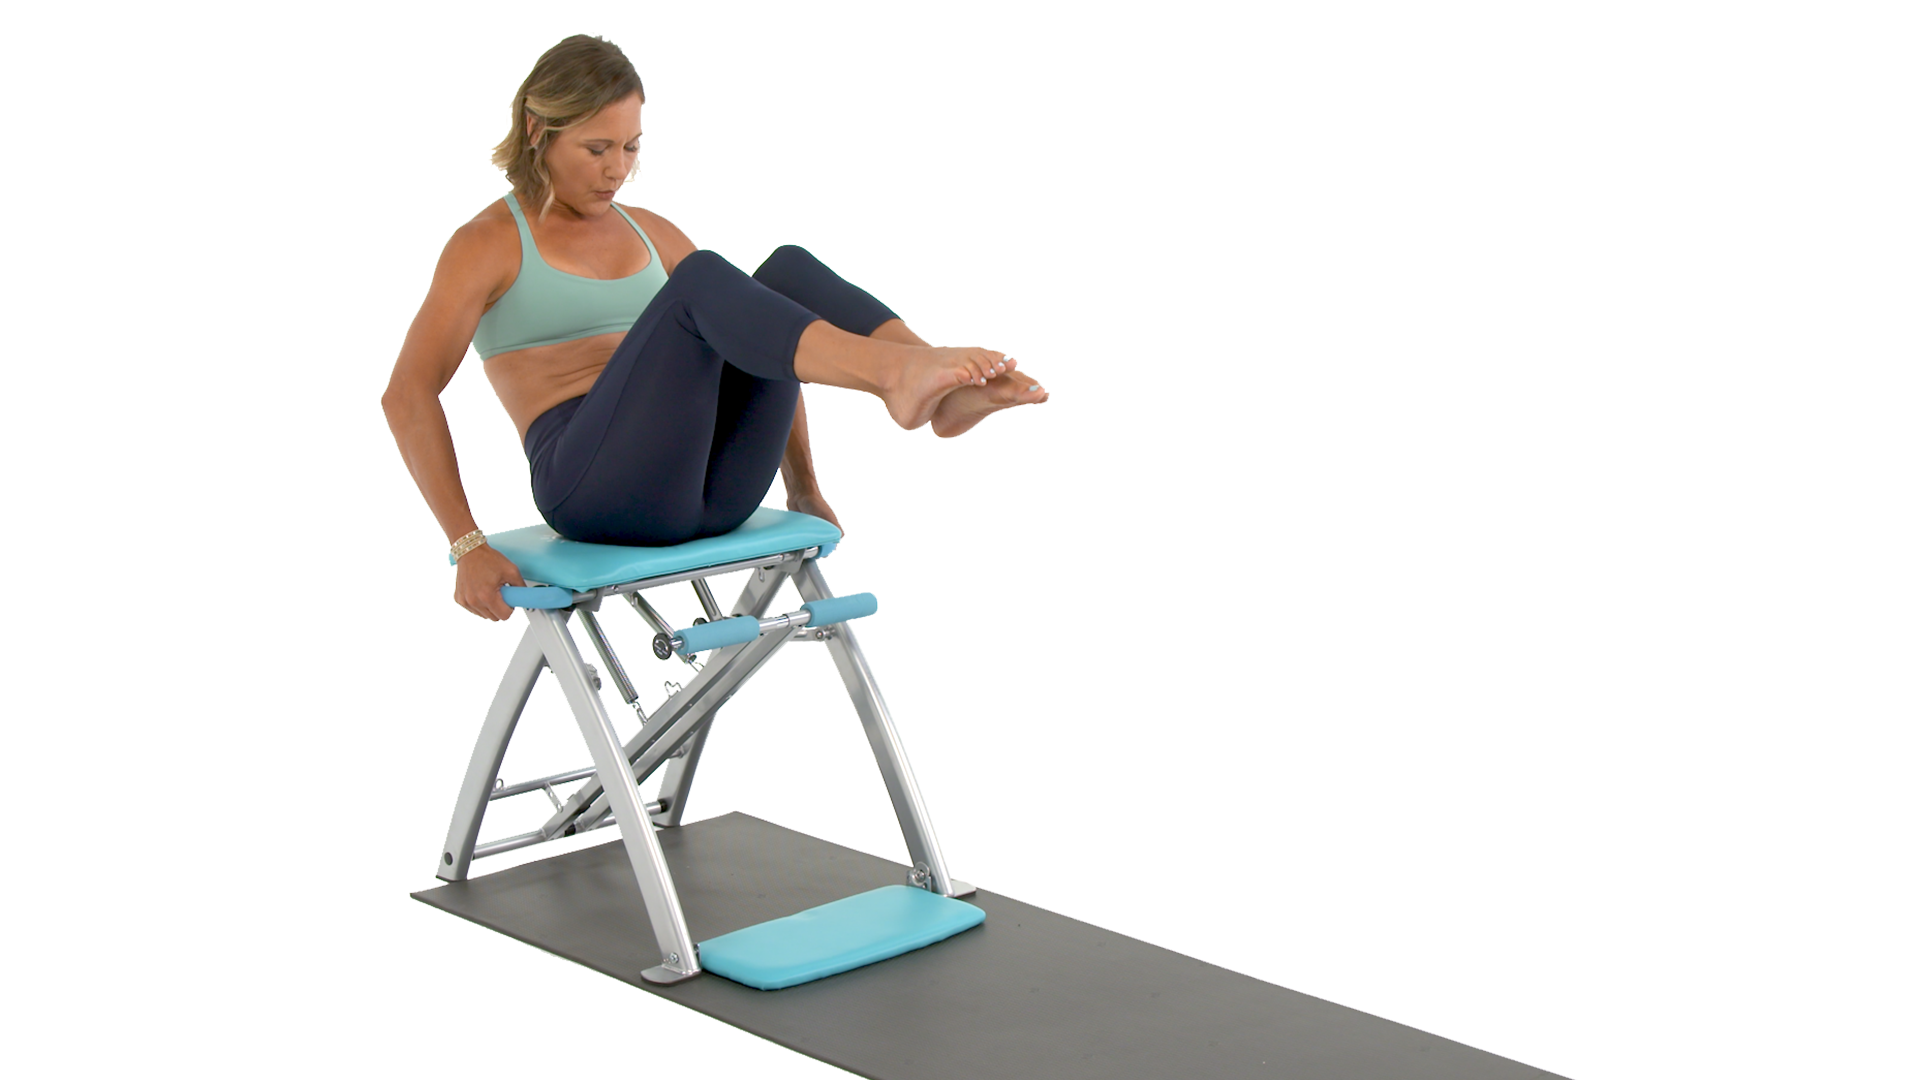 New Pilates Pro Chair By Lifes A Beach Reviews with Simple Decor